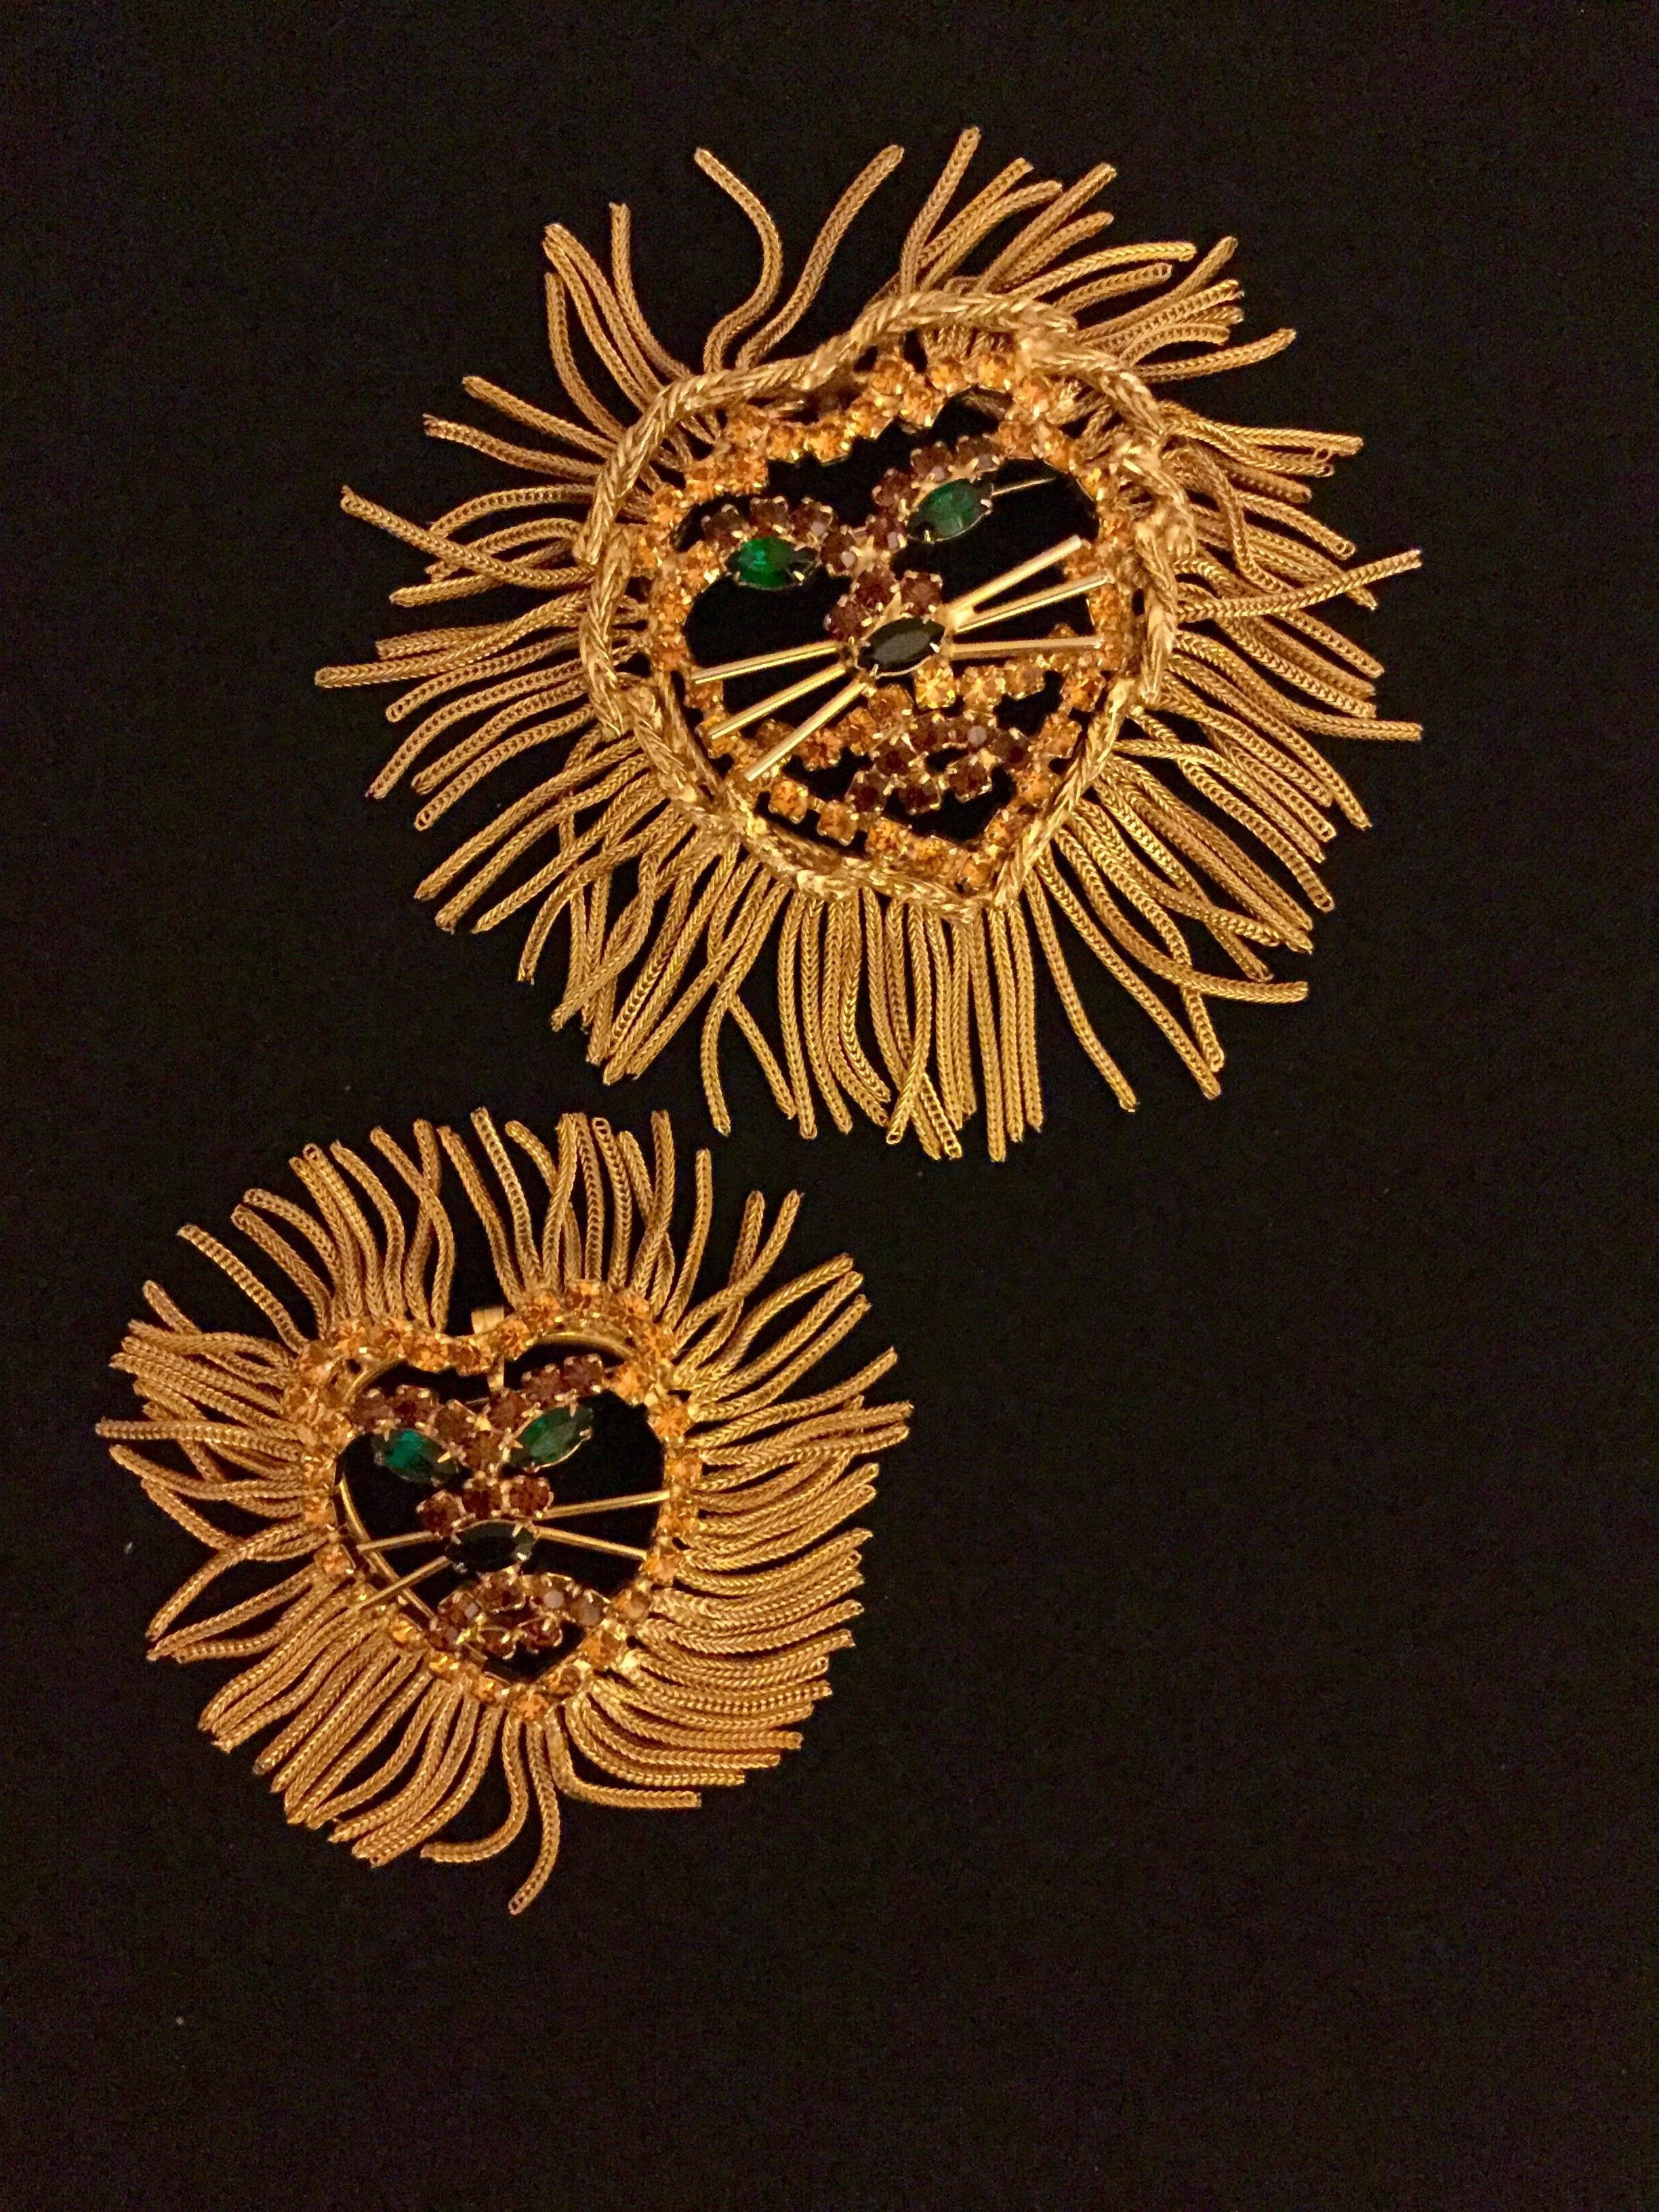 
These huge 1960's Lion pins are rare and so wearable today!

One would be a statement piece, but a pair worn together, is beyond amazing!

Glittering, prong-set, faux topaz and emerald pastes form the portraits of these two regal lions.  

A